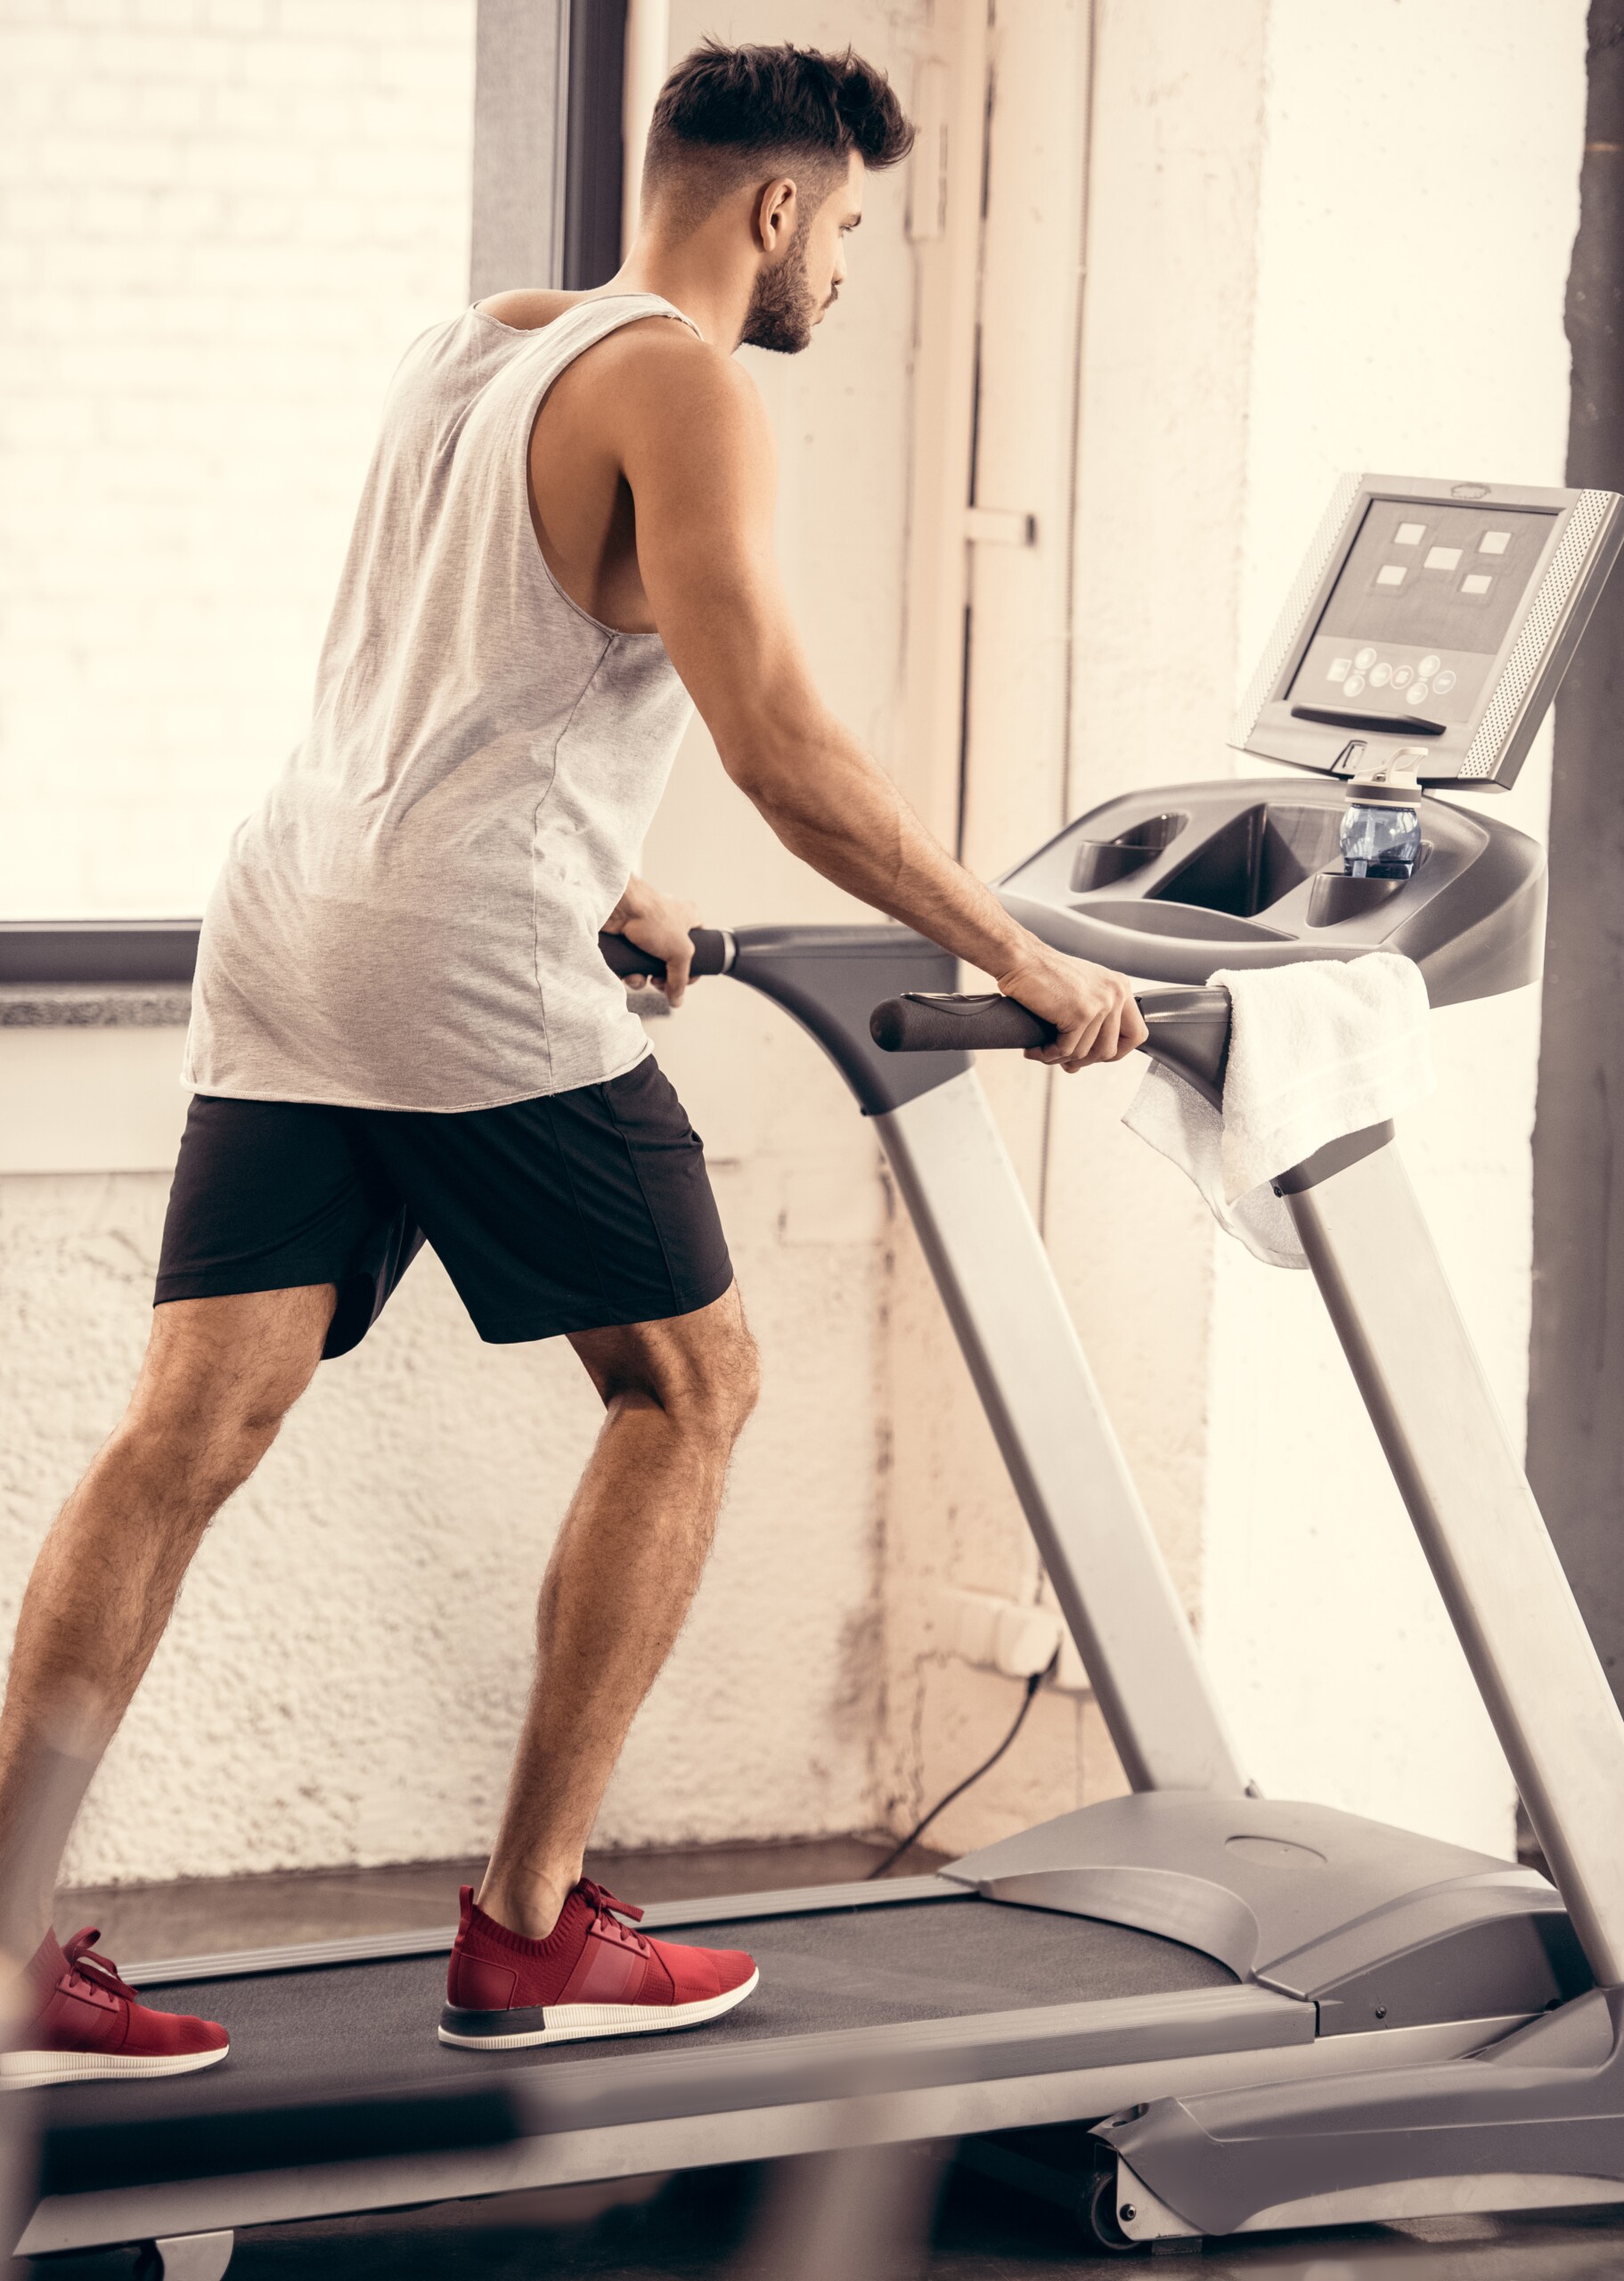 Why Do So Many Able-Bodied People Hold onto the Treadmill ?